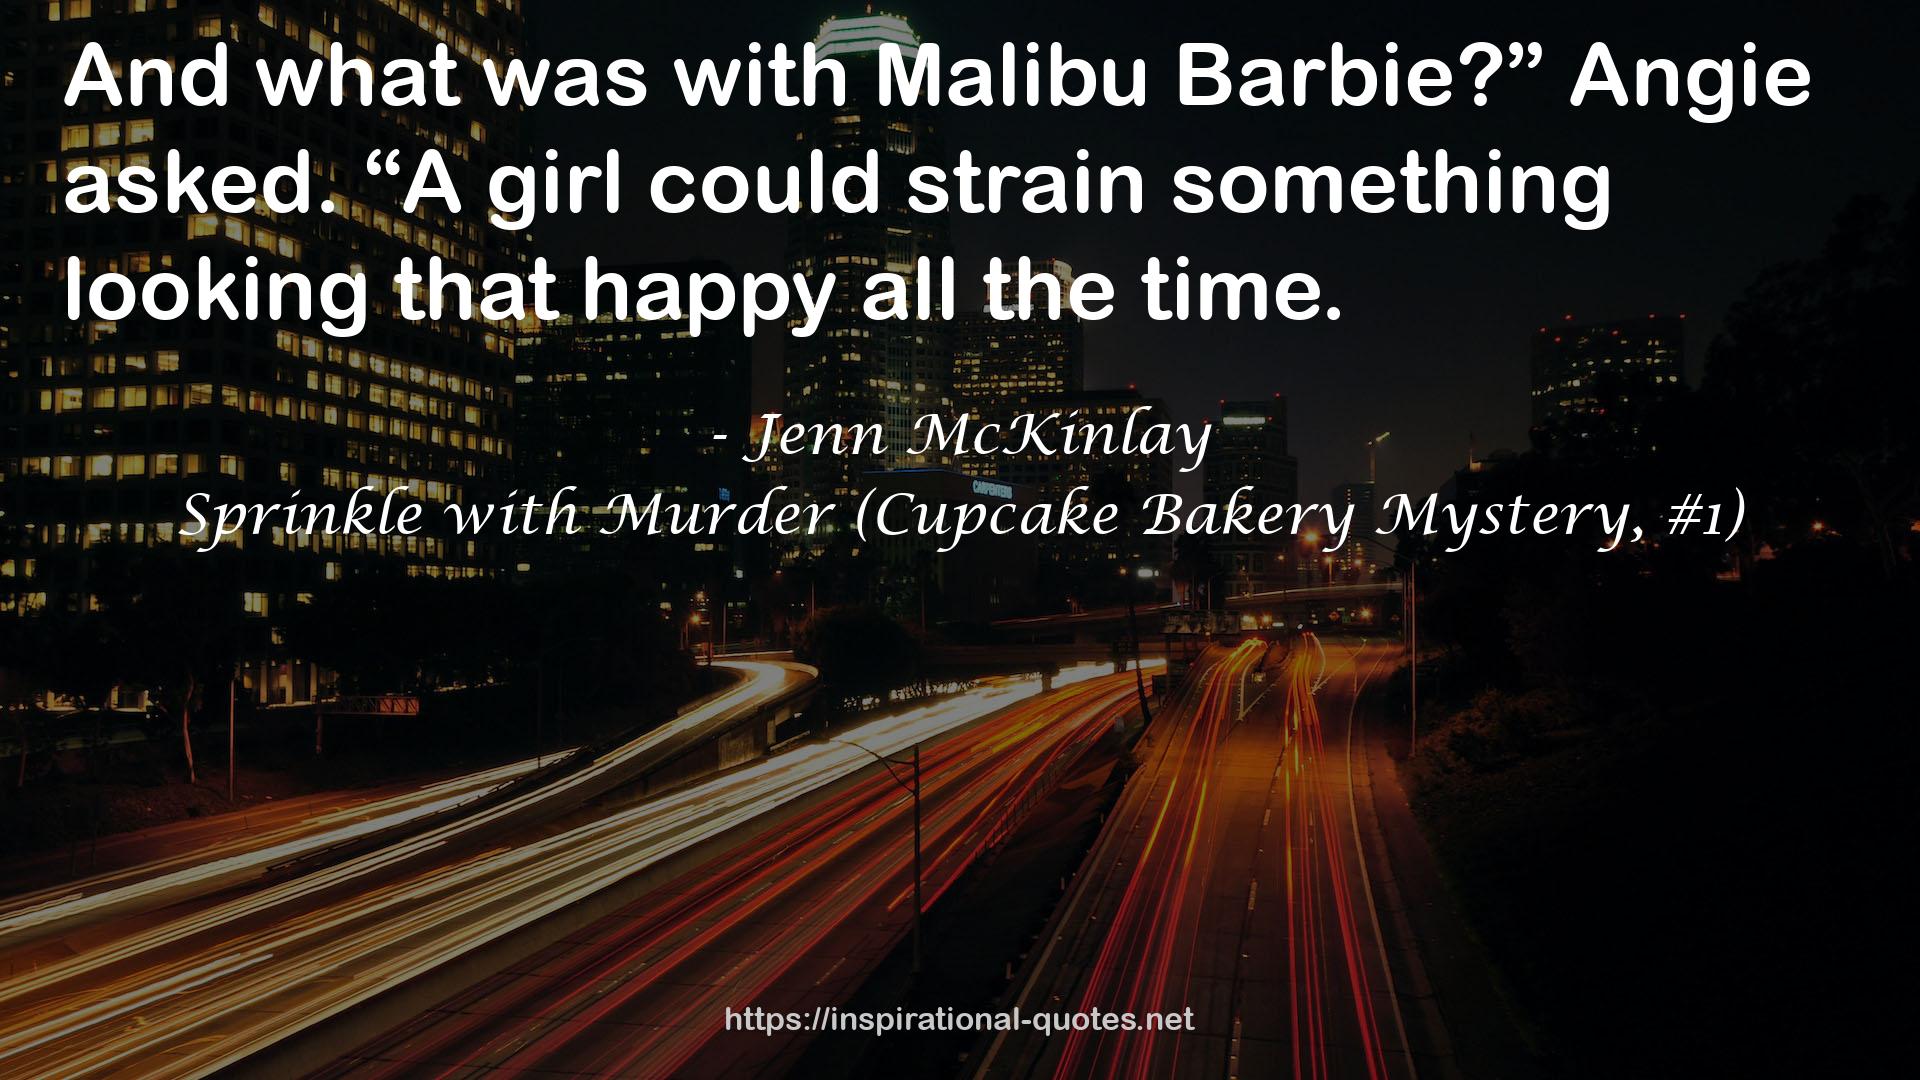 Sprinkle with Murder (Cupcake Bakery Mystery, #1) QUOTES